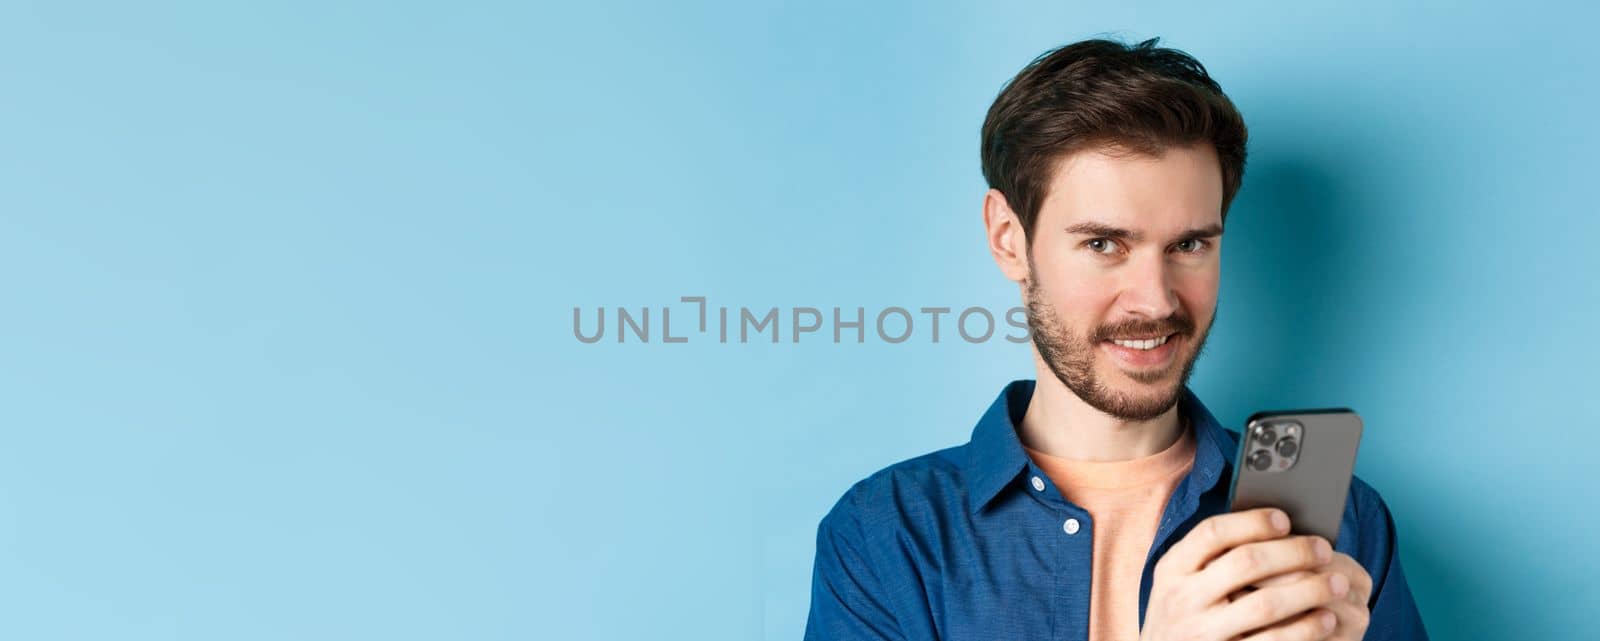 Close-up of attractive caucasian man holding mobile phone and smiling at camera, standing in casual outfit on blue background.